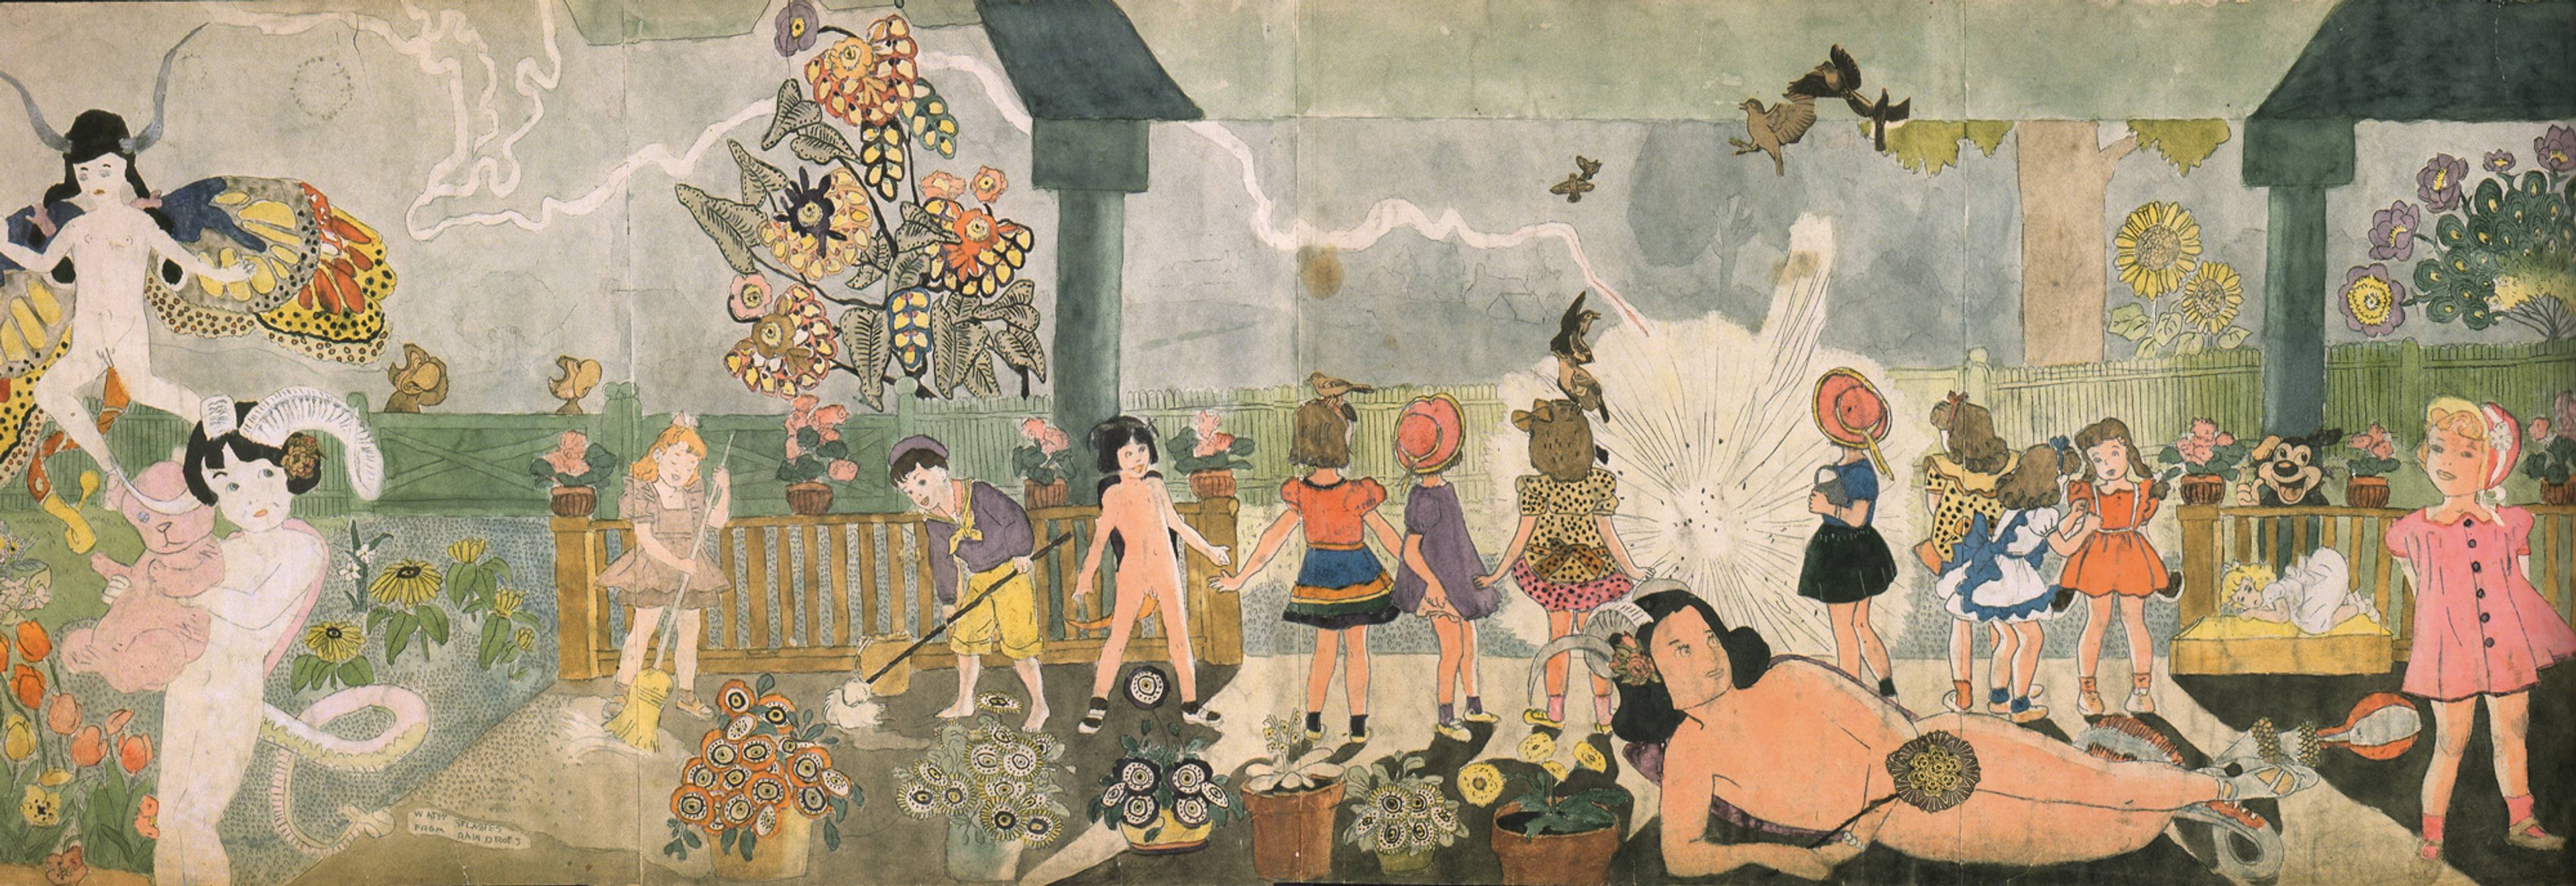 Henry Darger, 172 At Jennie Richee.